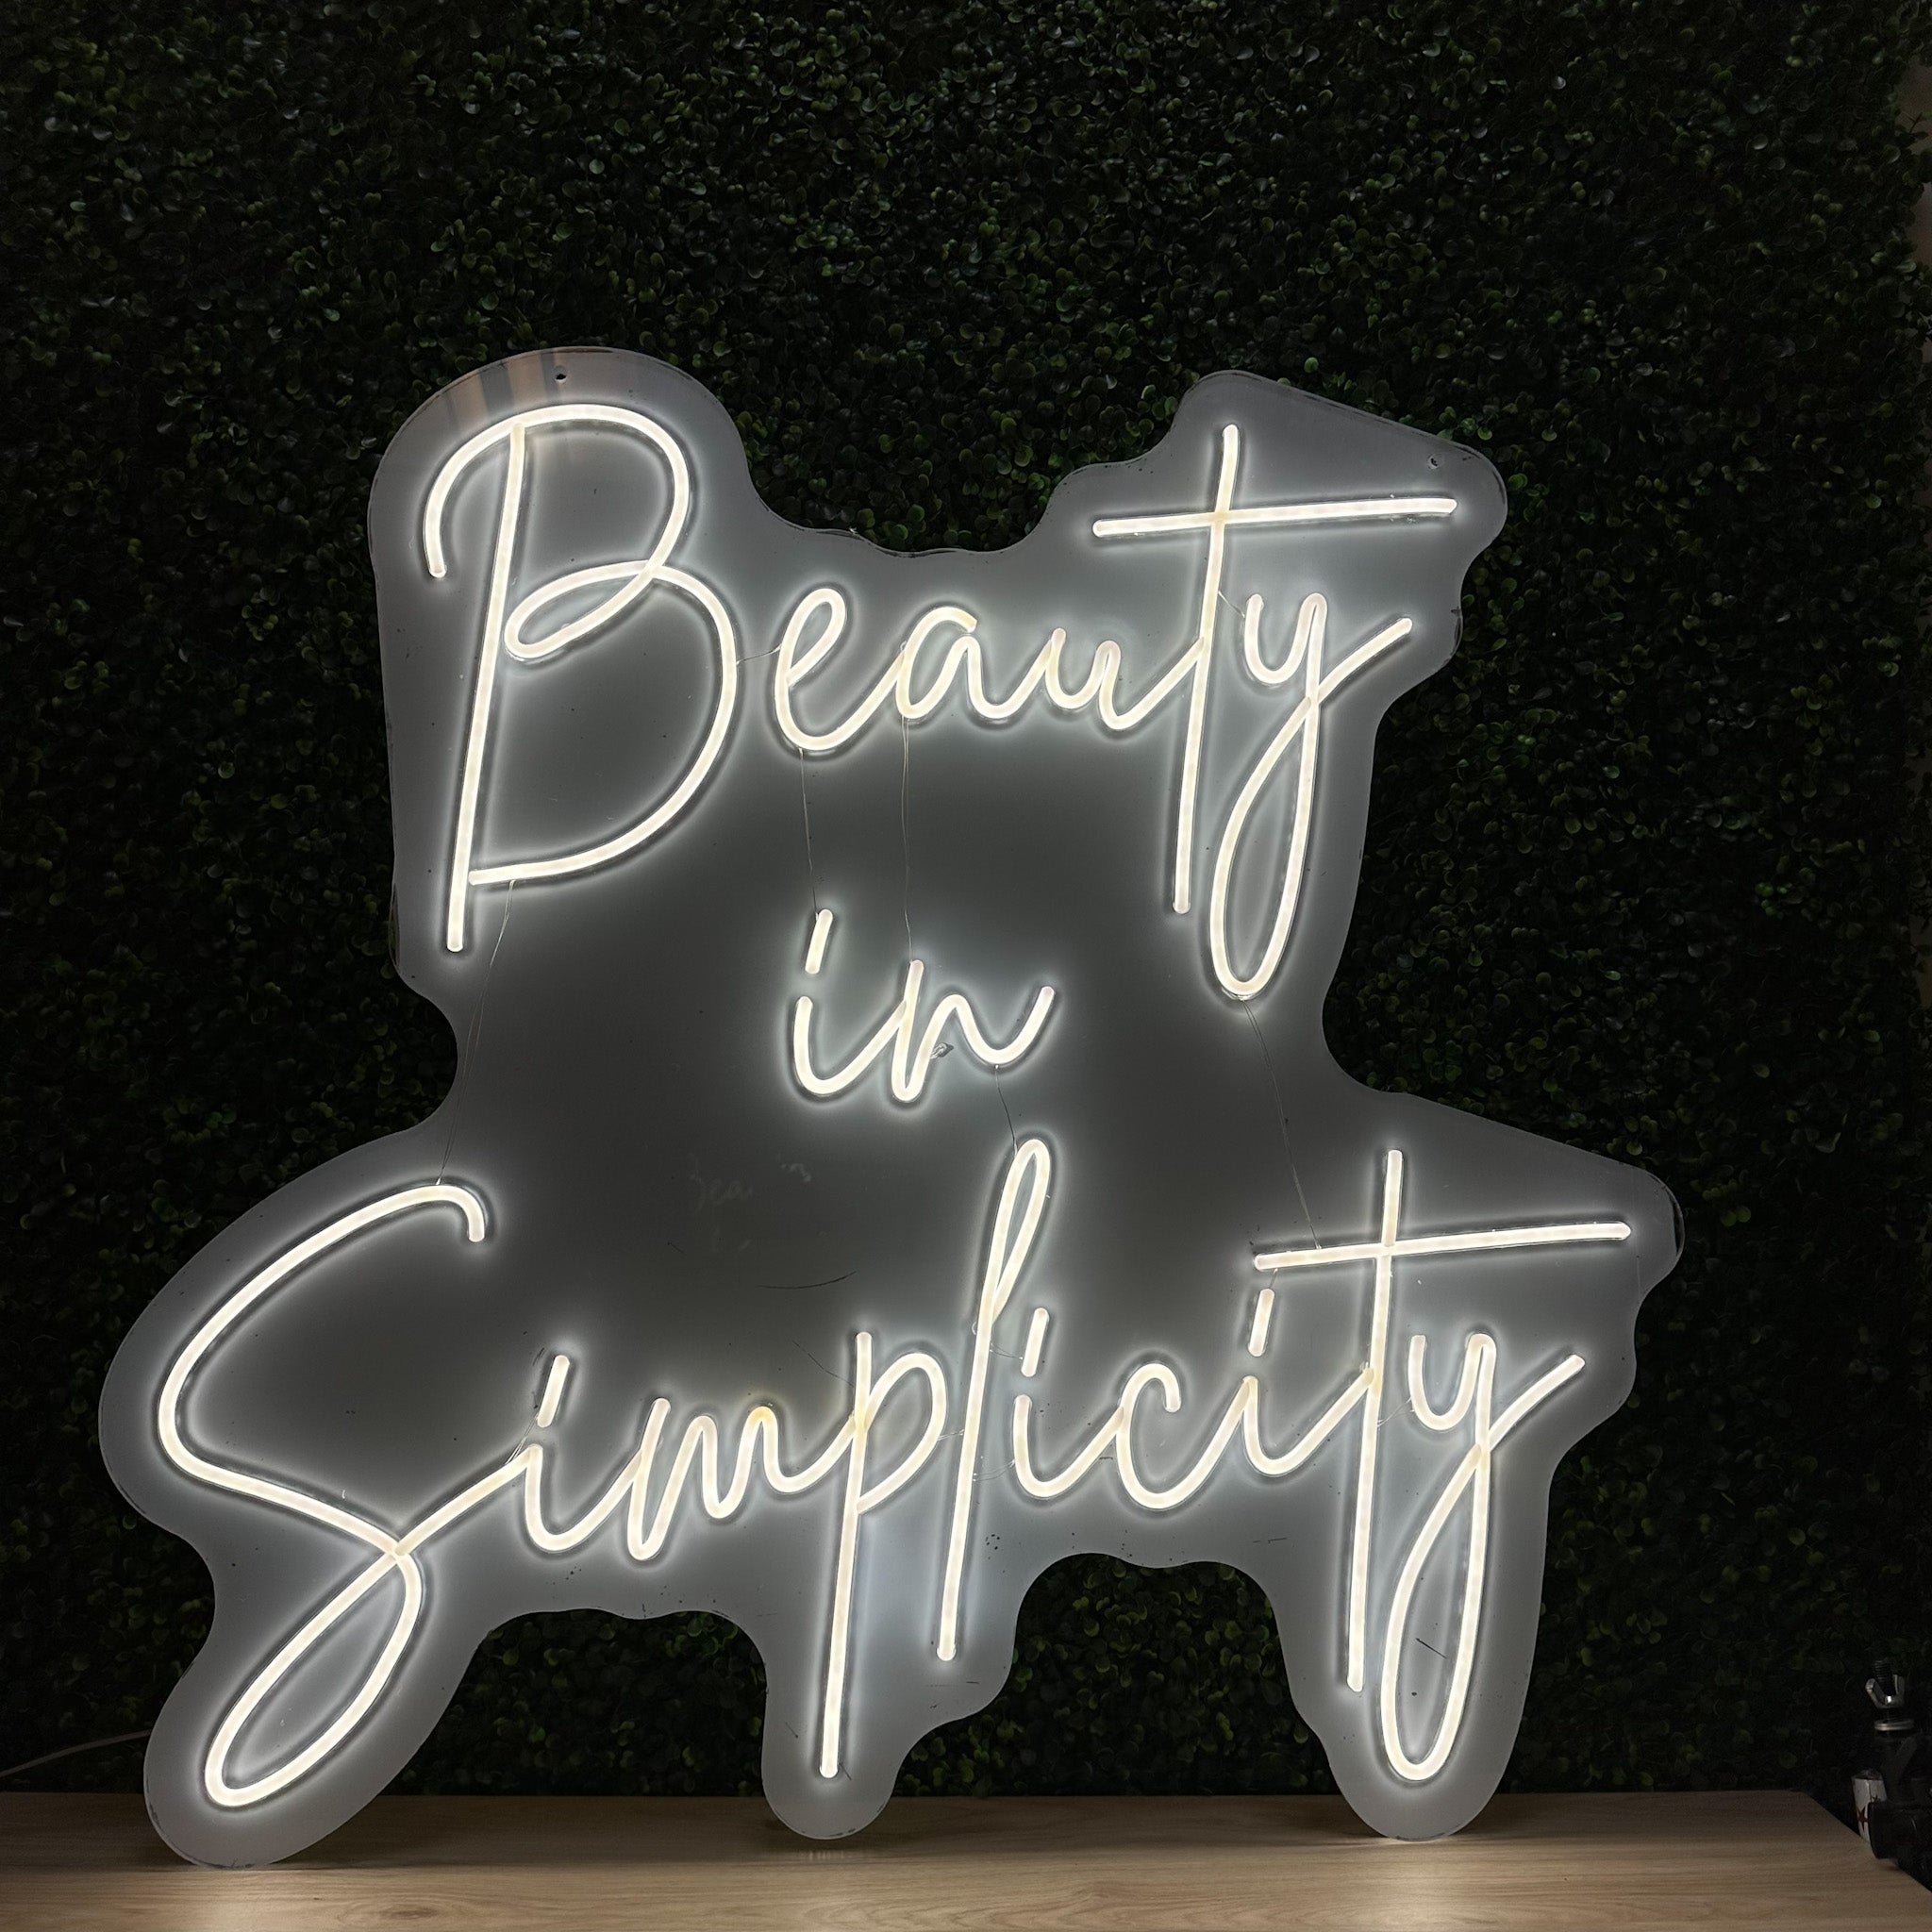 Beauty in Simplicity RS LED Neon Sign - Fabricado em Londres